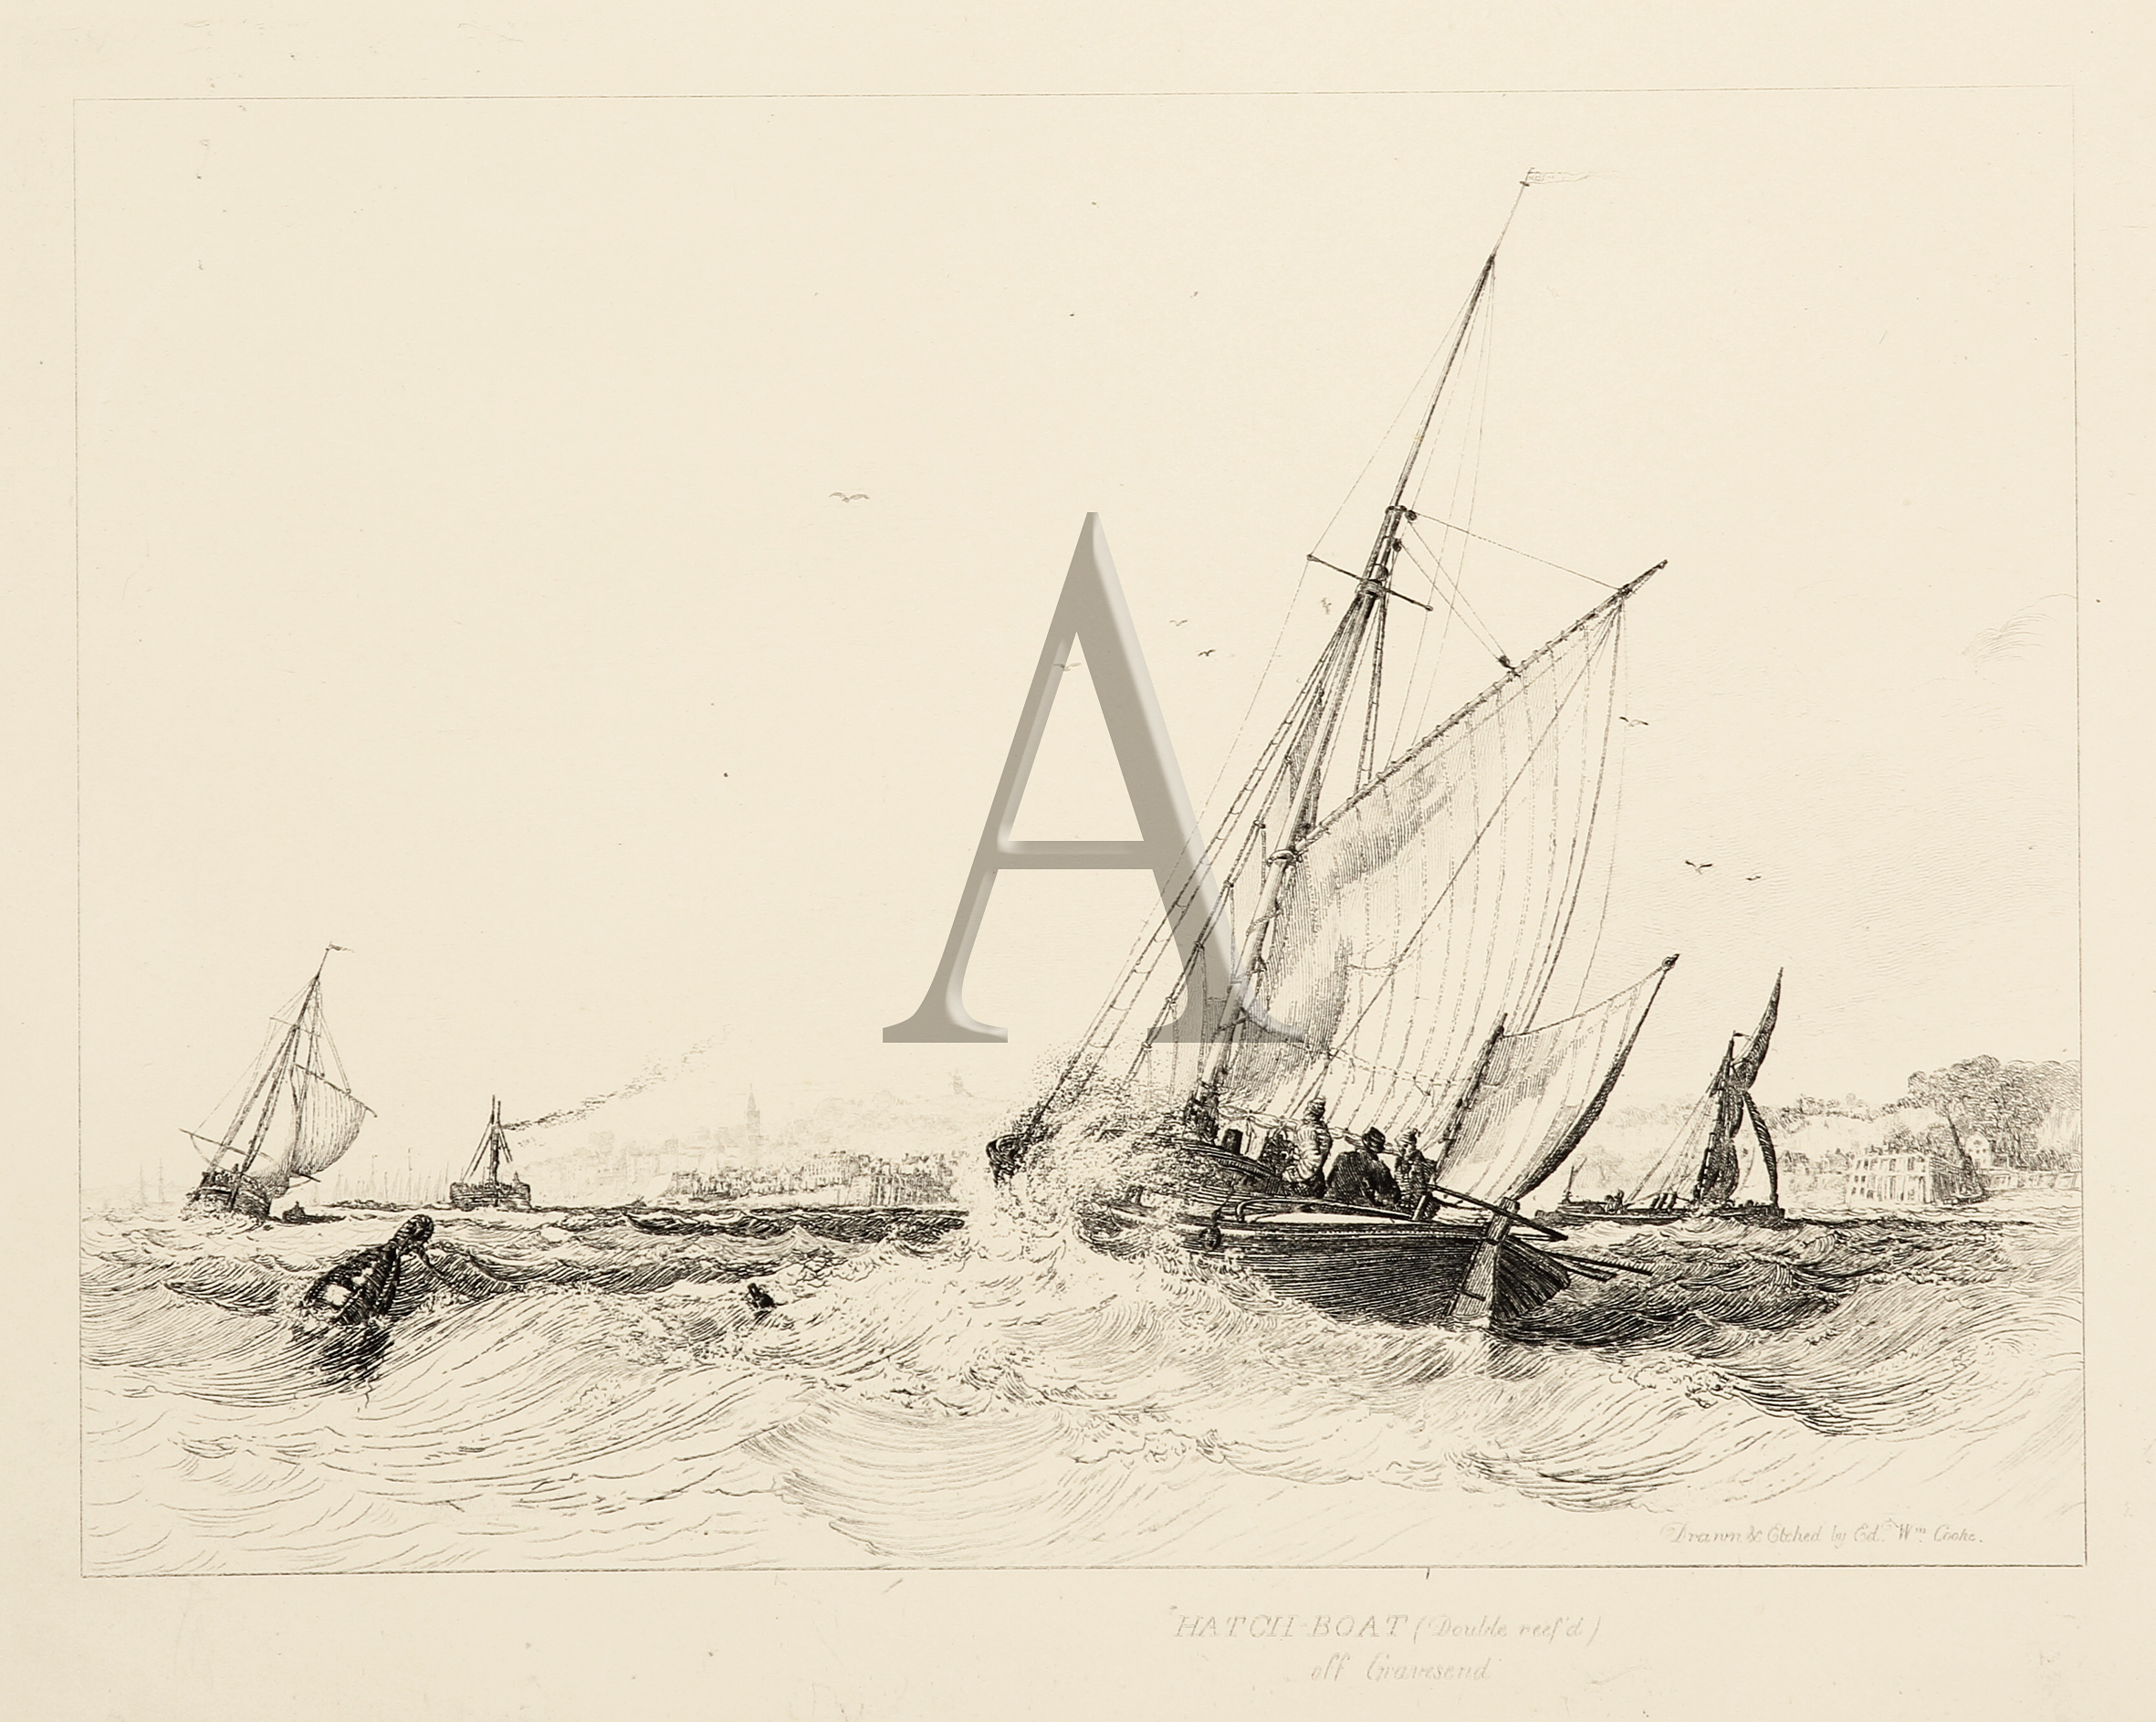 Hatch-Boat (Double reef'd) off Gravesend. - Antique Print from 1829